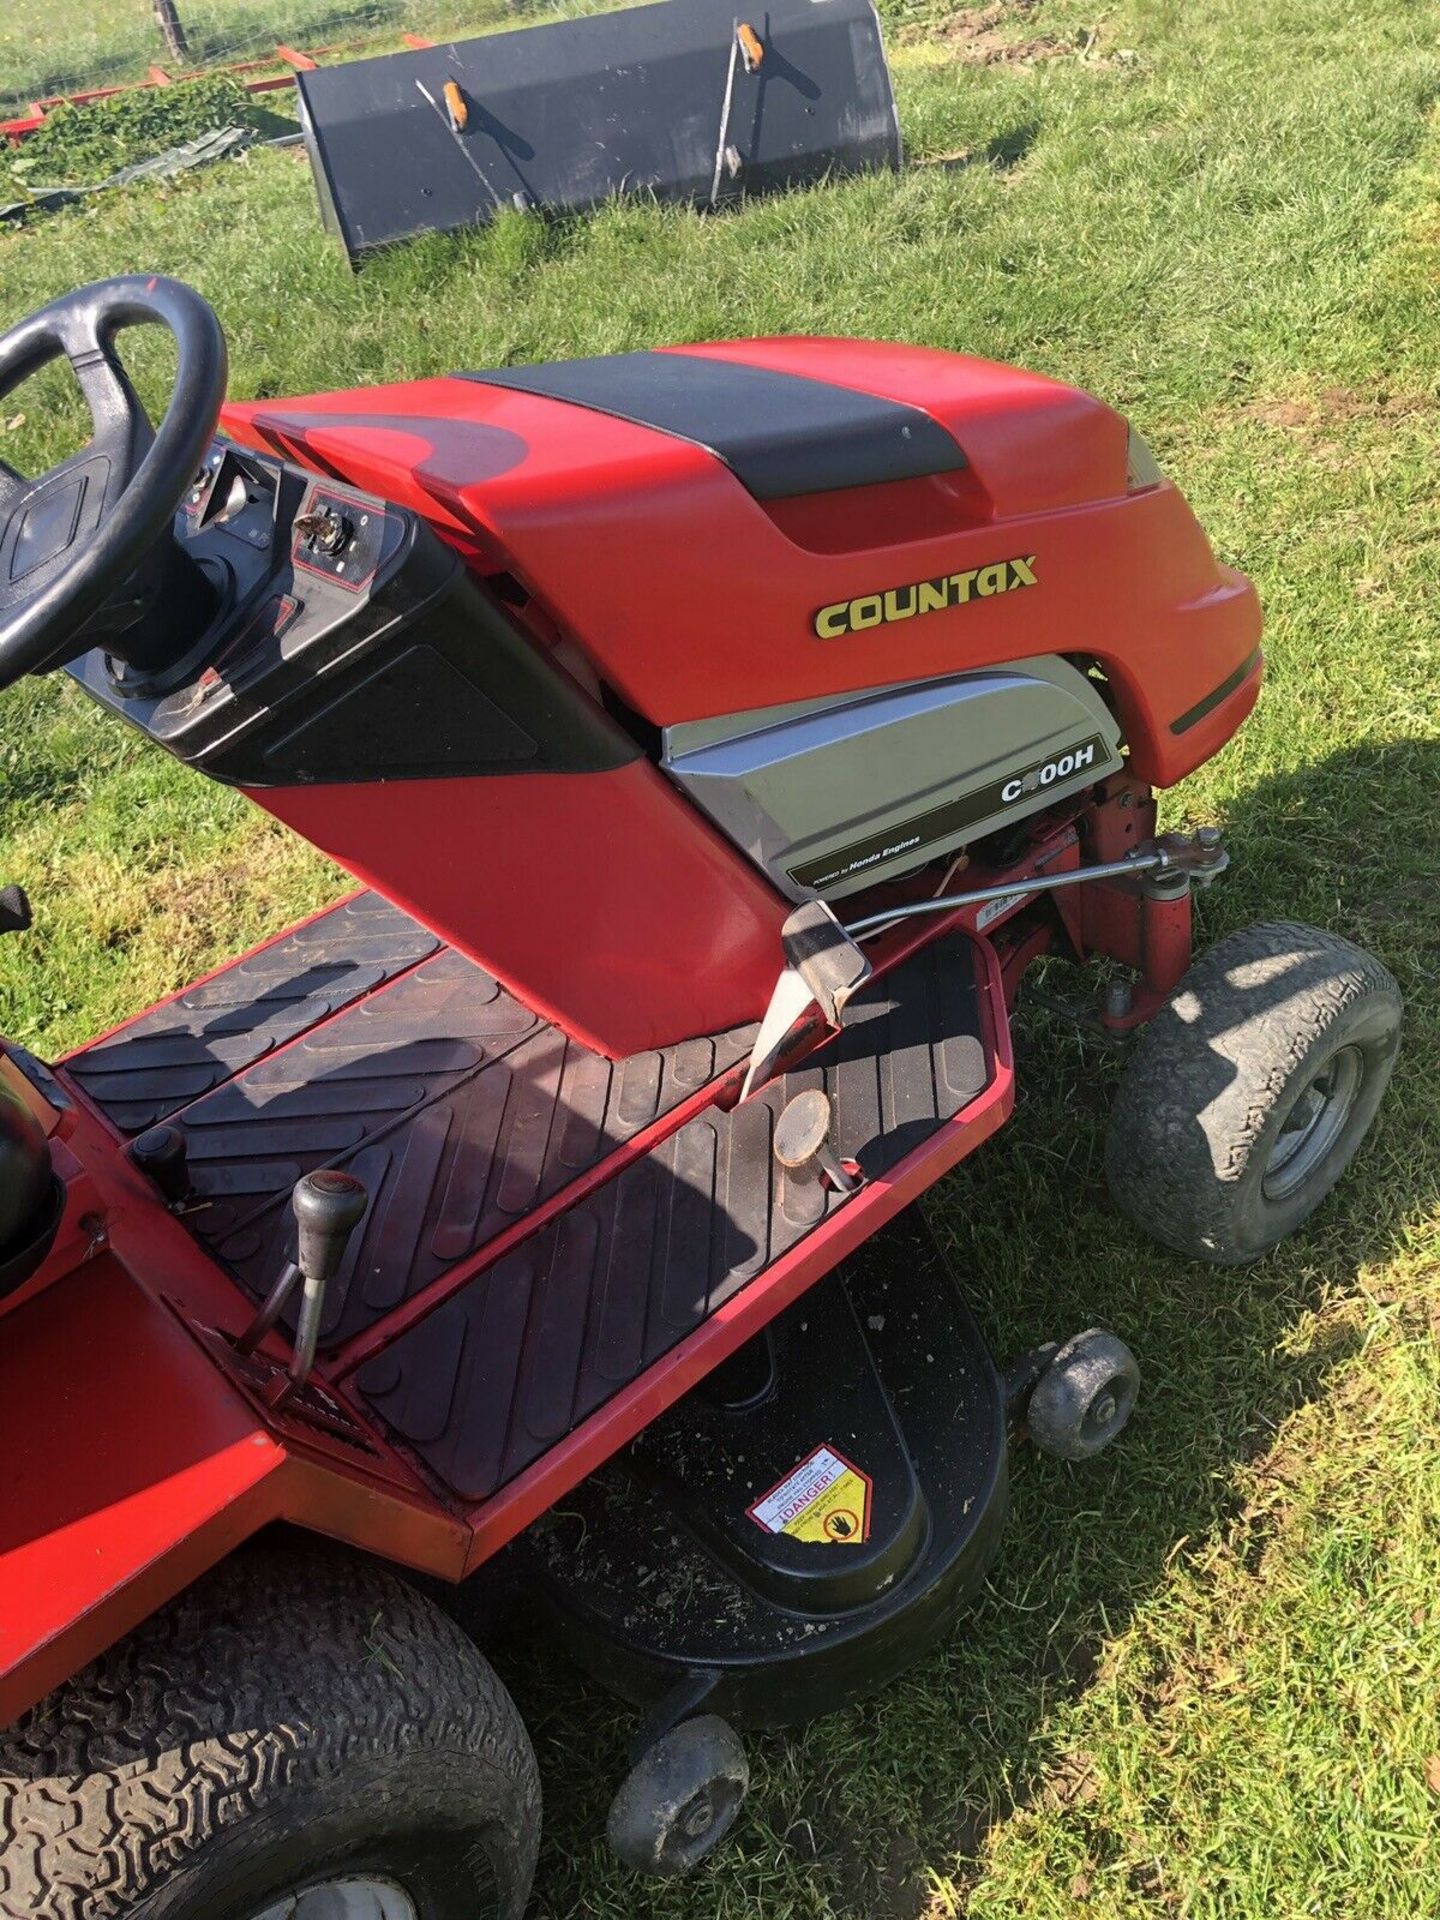 LOT WITHDRAWN Countax C800H Ride On Lawn Mower - Image 7 of 8